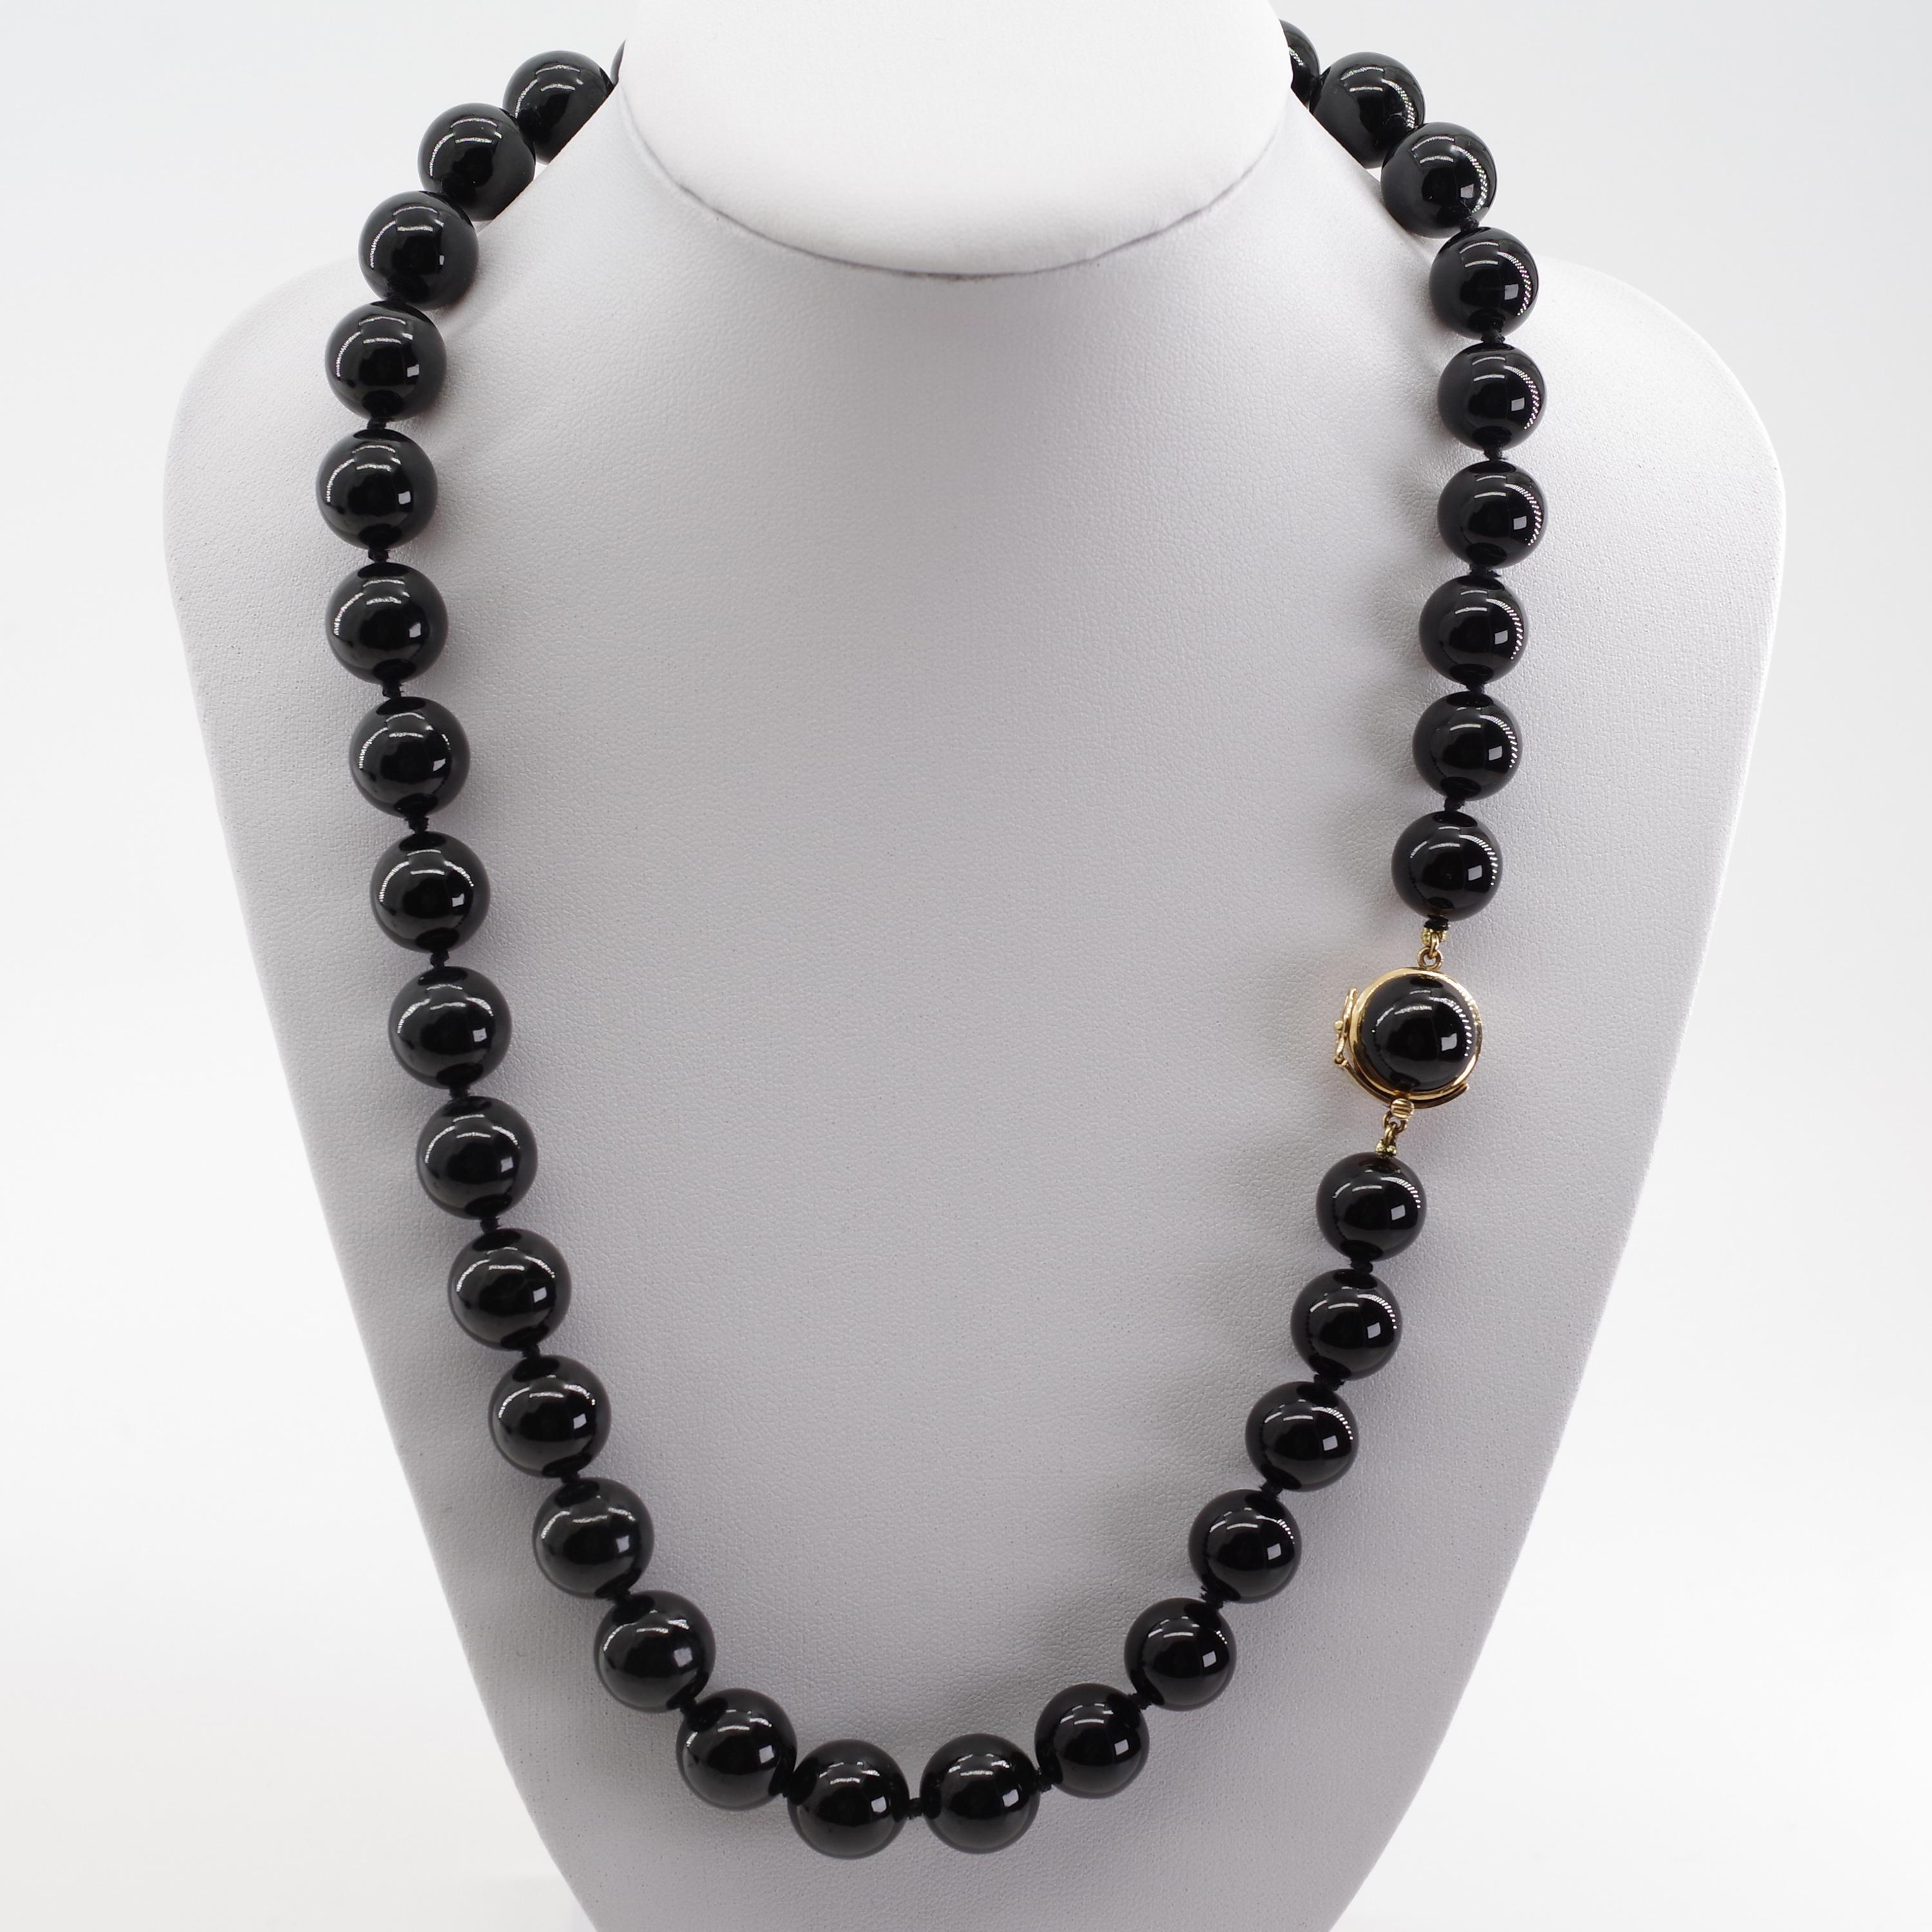 This iconic necklace is the definitive authentic Gump's black jade necklace. Gump's, in case you are not familiar with the name, was a legendary San Francisco emporium that became world-renowned for its Asian art and jewelry, especially its jade